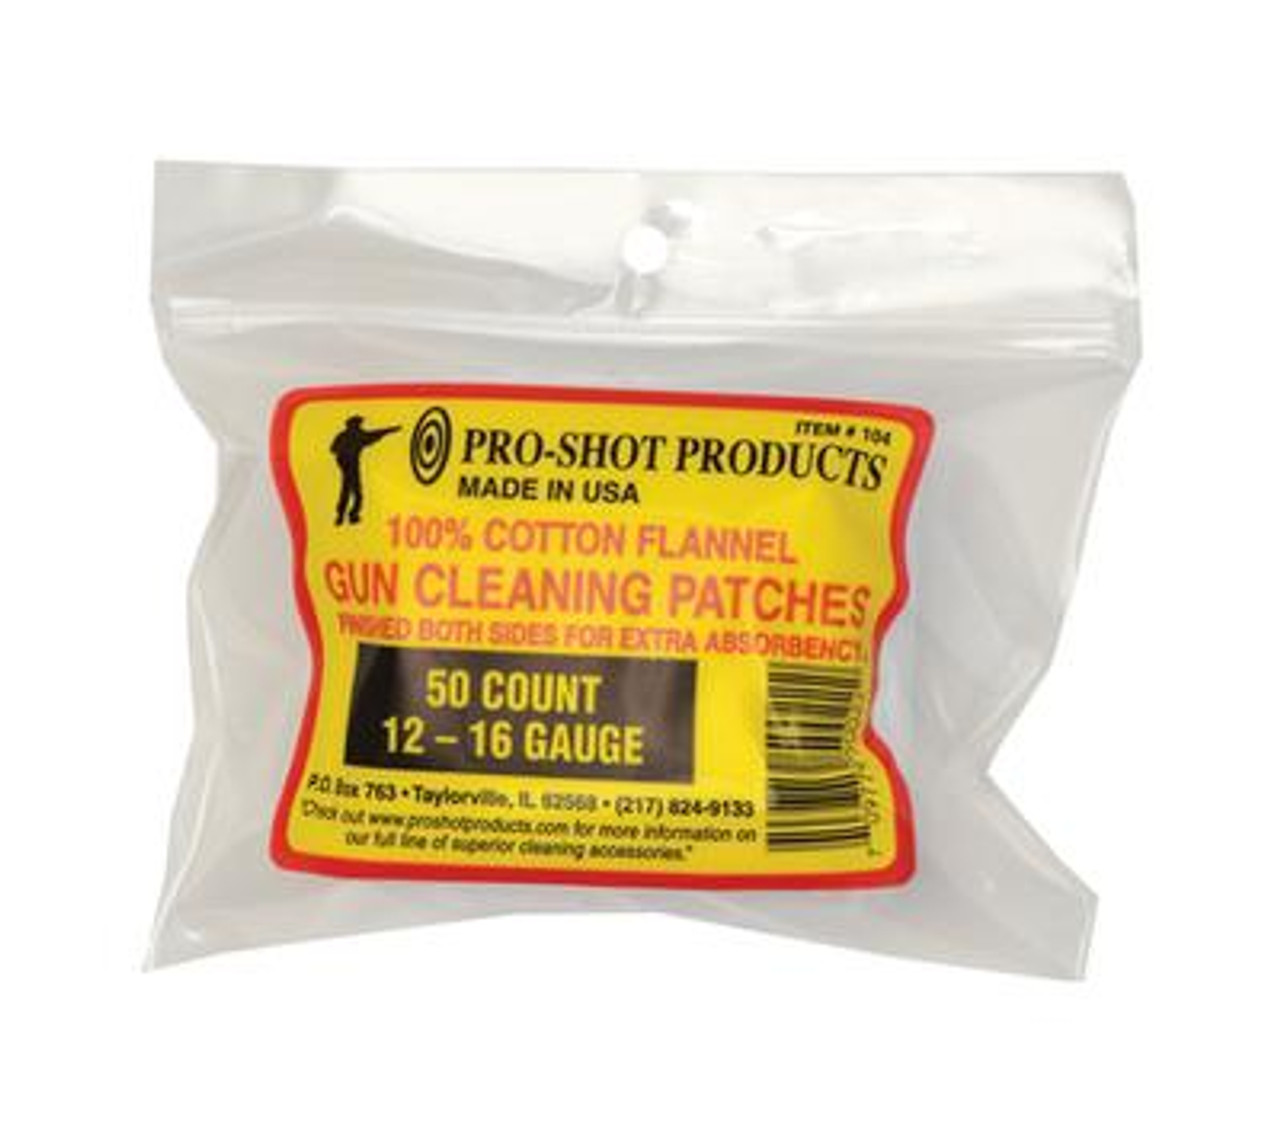 Pro-Shot 3" Square Cleaning Patches, 12-16 Ga, 50 Pack